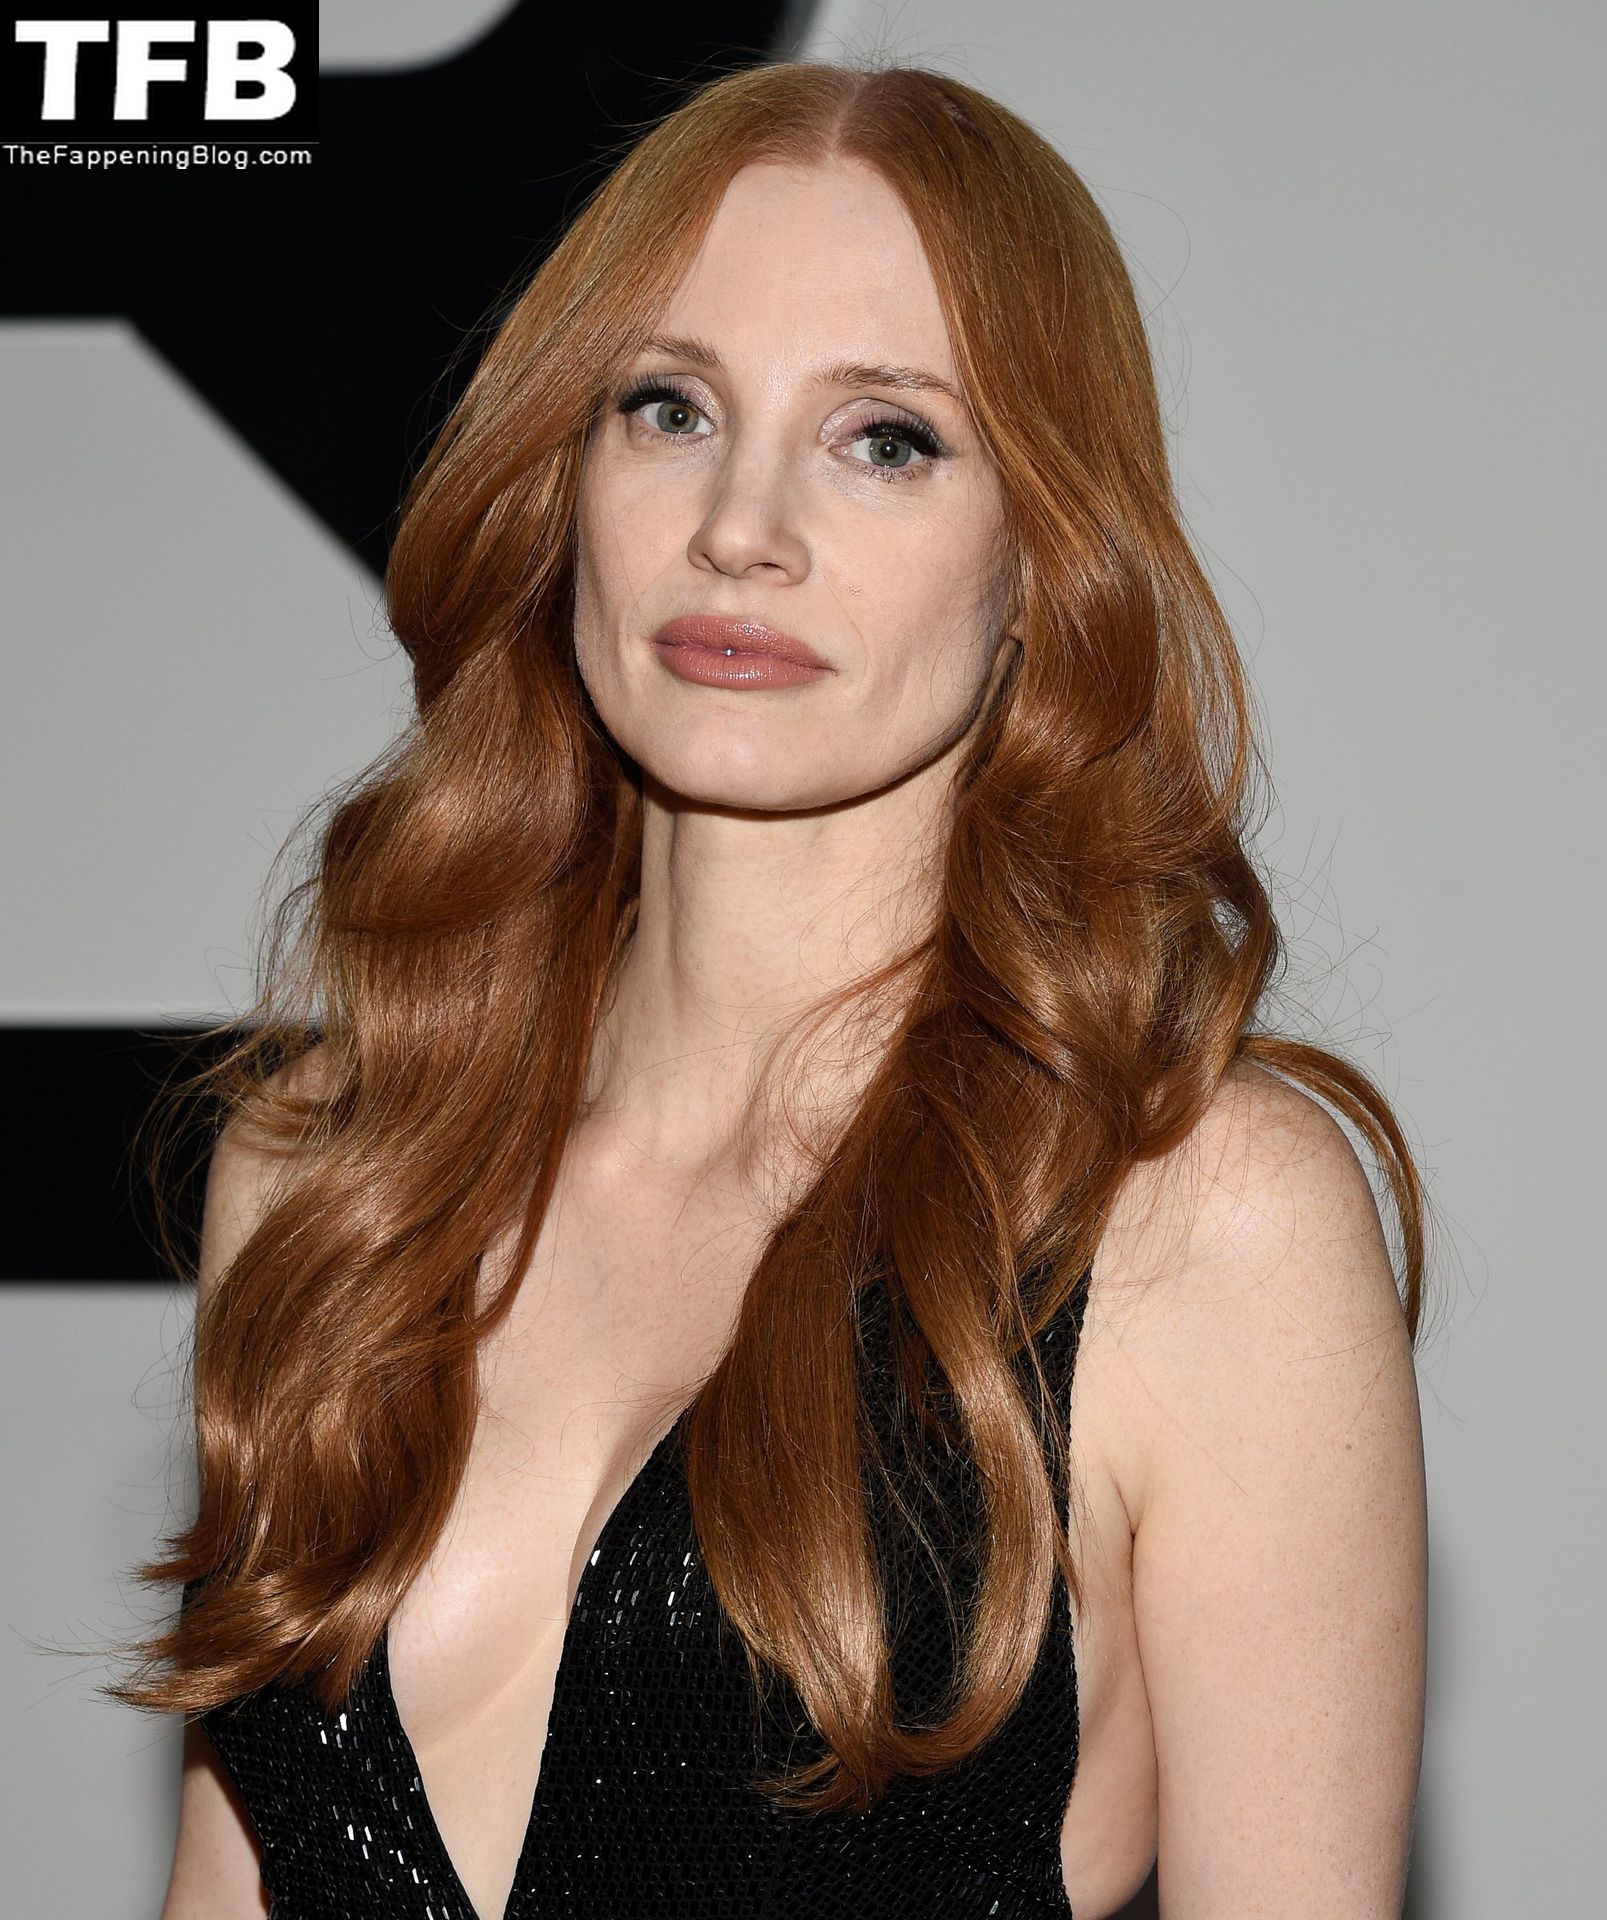 Jessica-Chastain-Sexy-The-Fappening-Blog-59.jpg